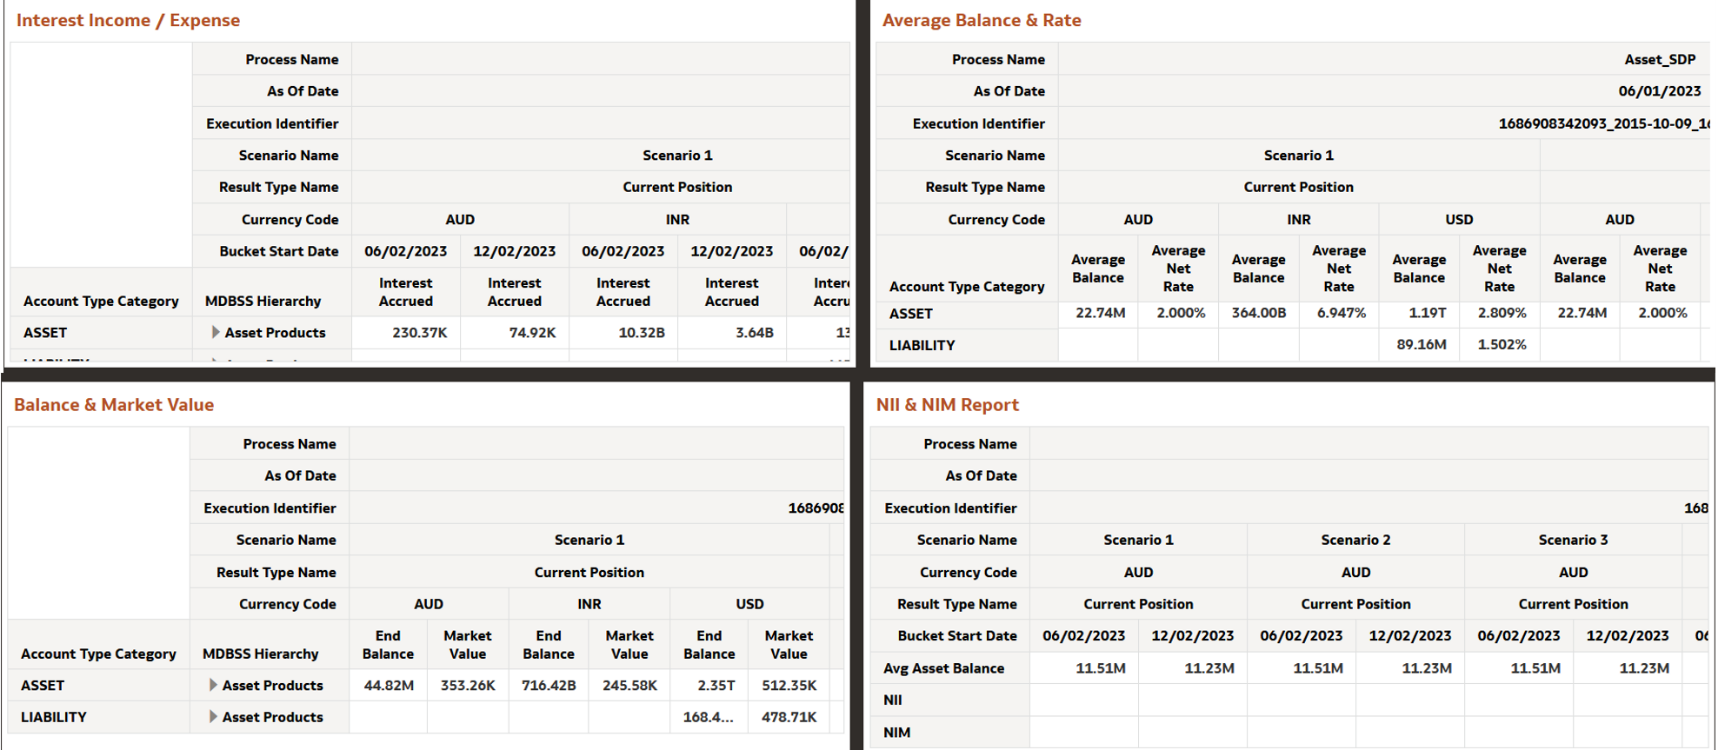 Financial Results MDBSS (Income Expense) Report